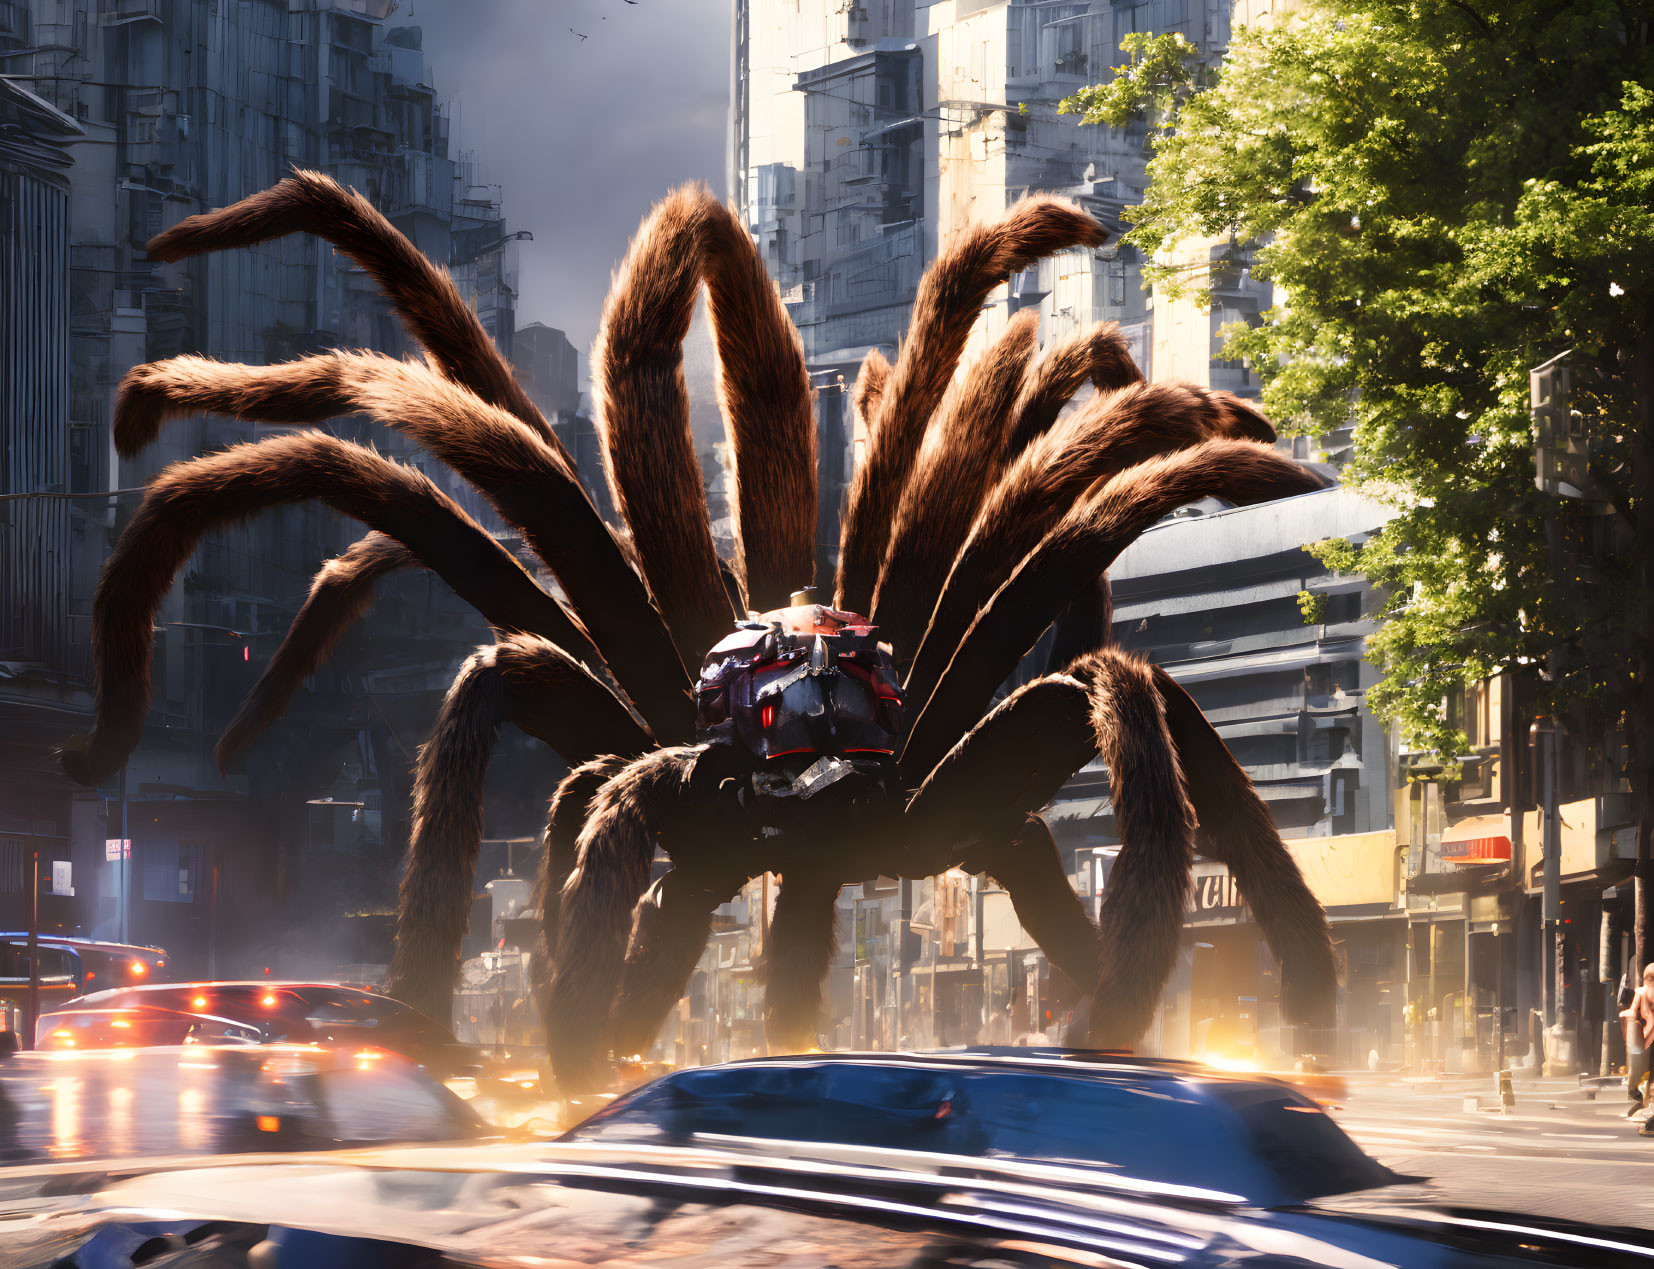 Gigantic mechanical spider creature in urban setting with fleeing cars